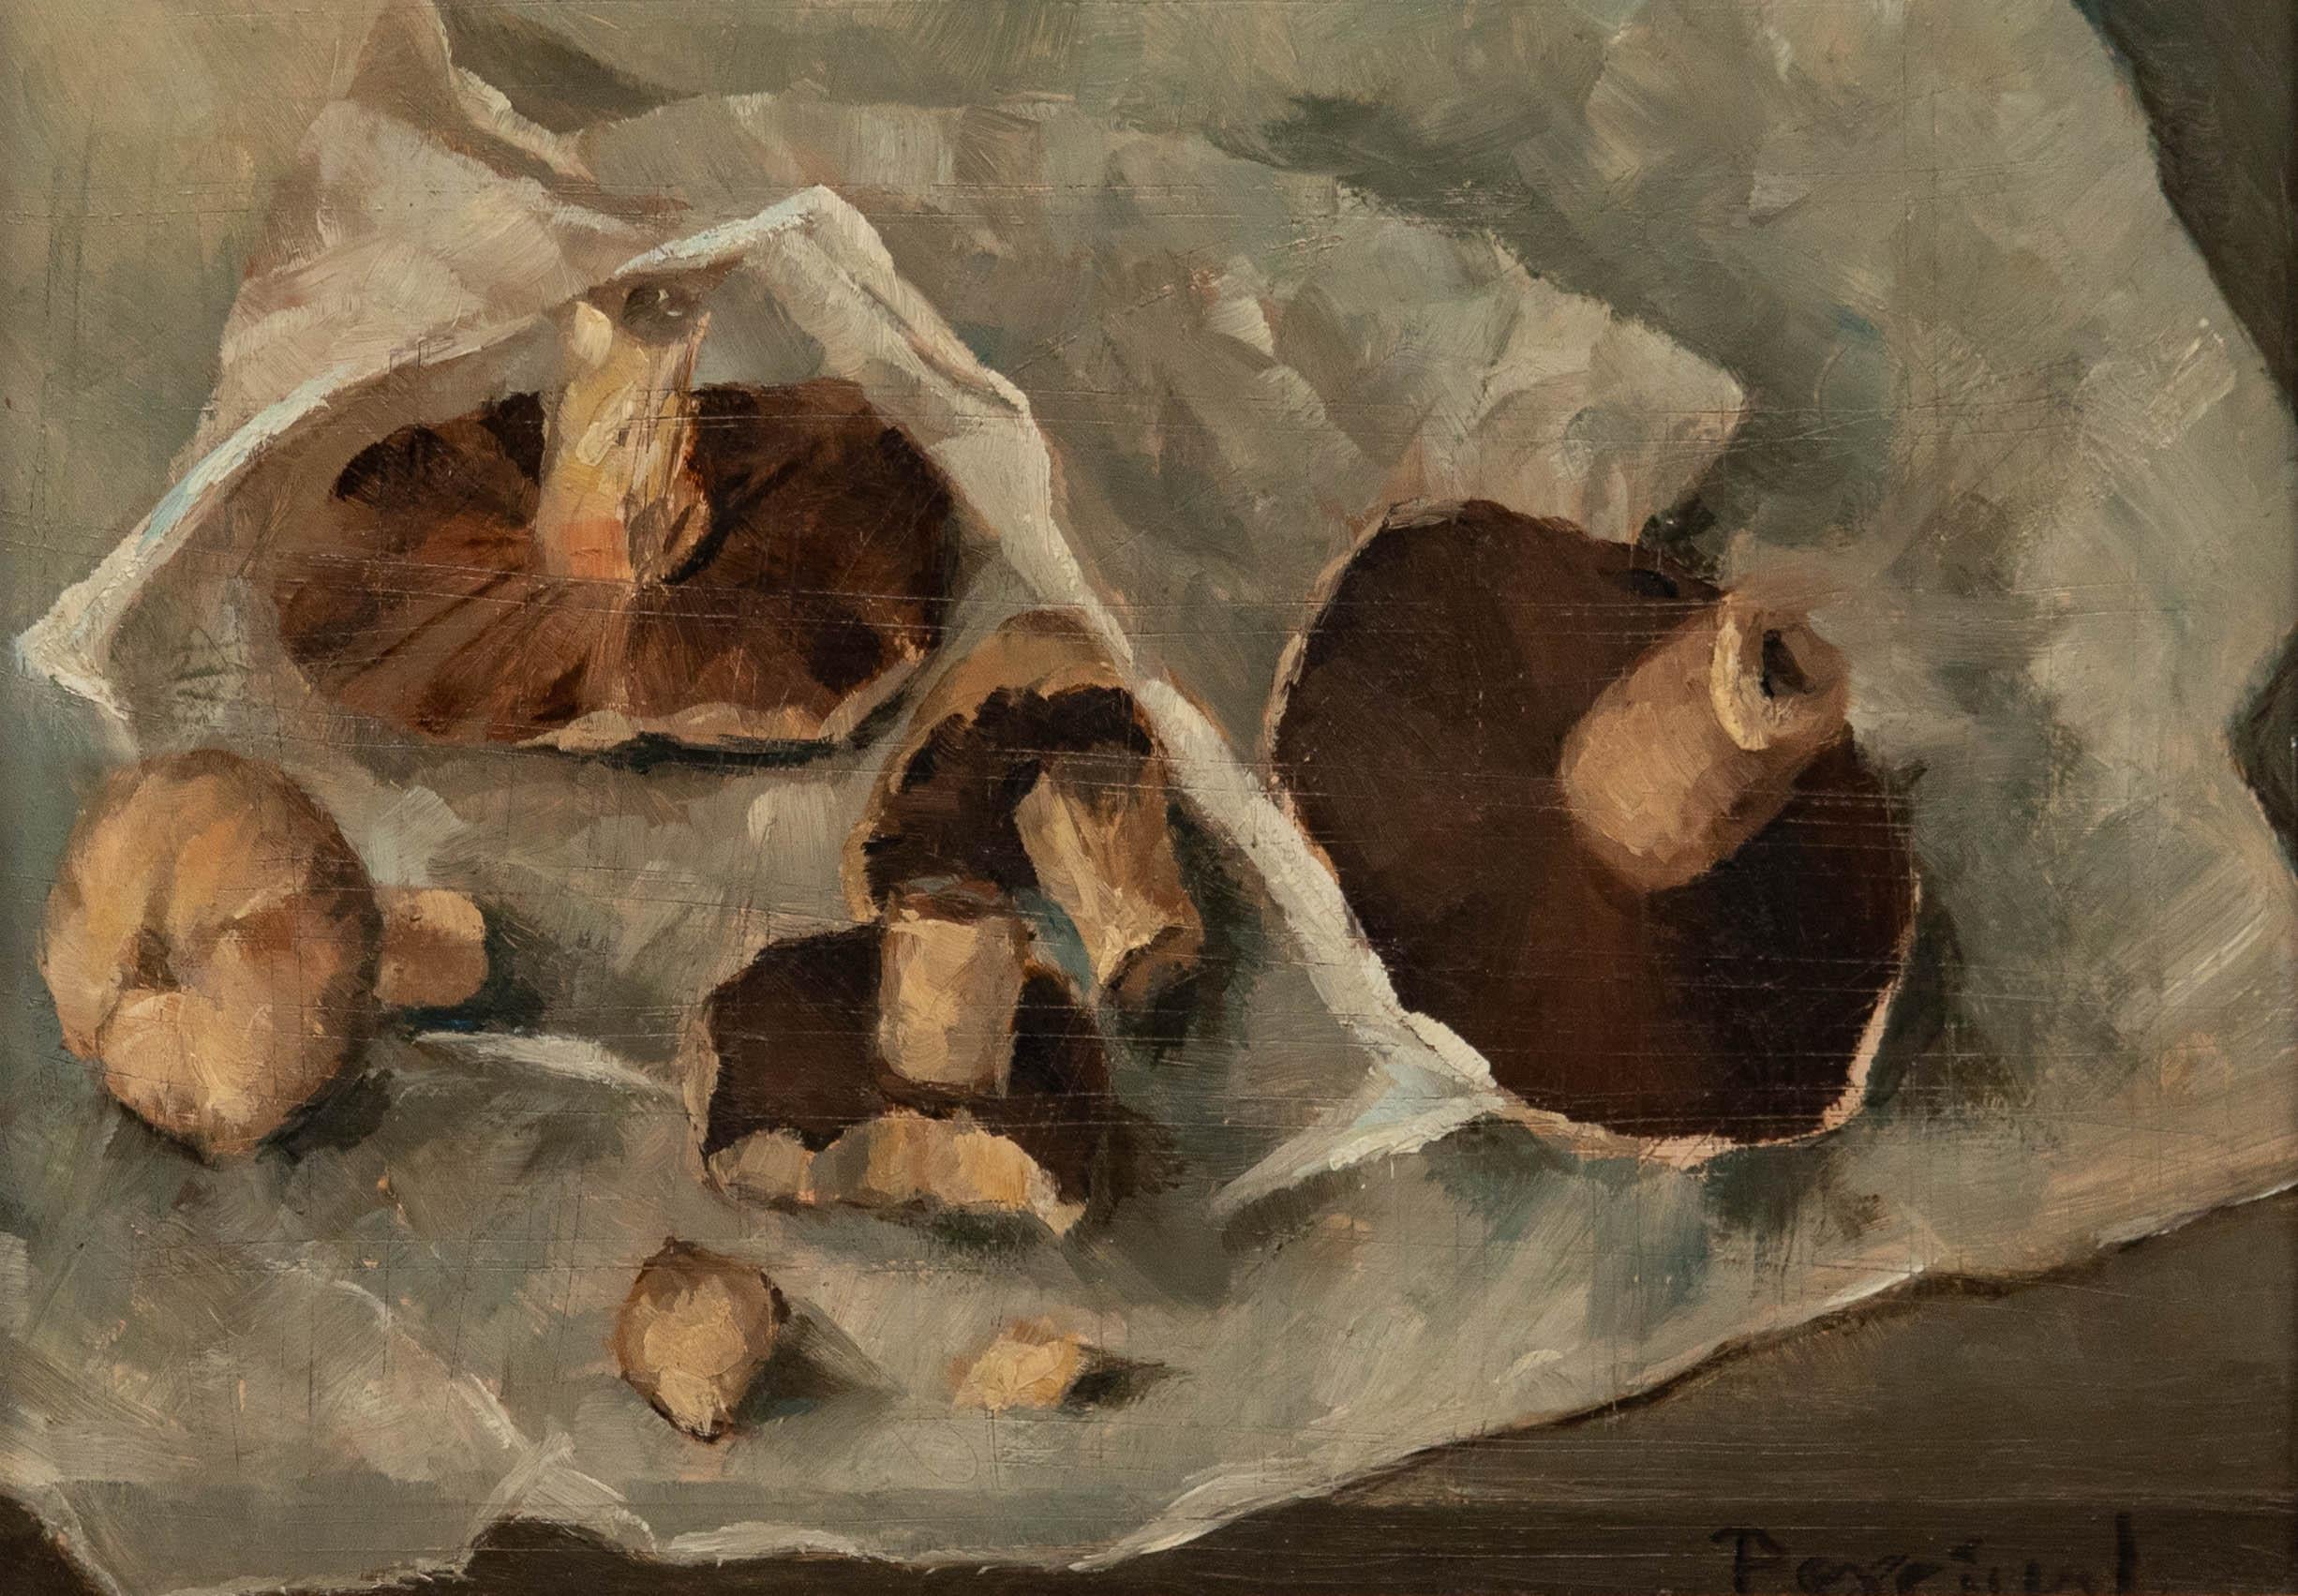 Percival - Framed Mid 20th Century Oil, Study of Mushrooms - Painting by Unknown